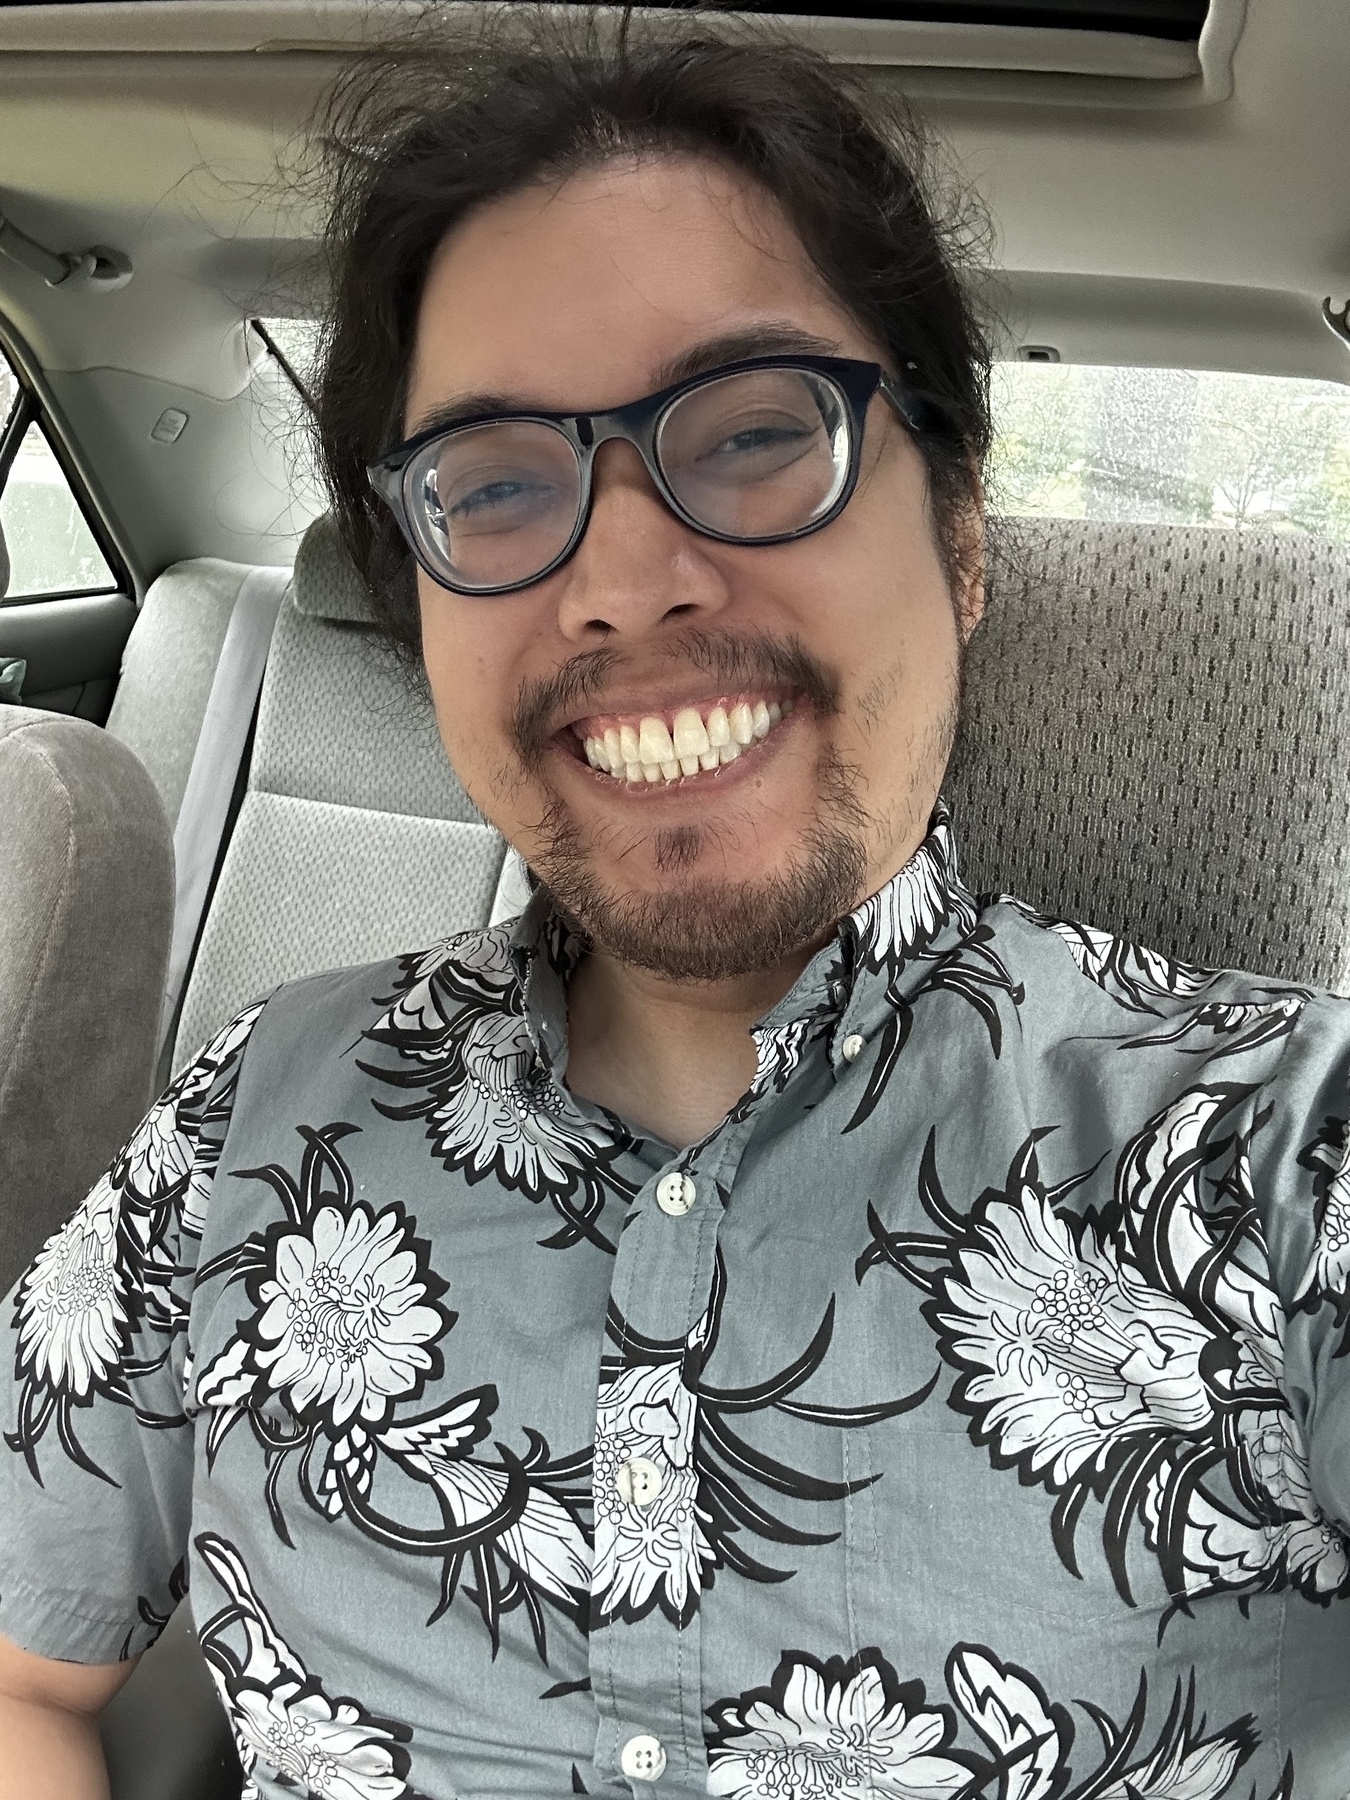 Selfie in a car by Miguel a Filipino man with glasses and black hair in a ponytail. He is smiling with teeth looking at camera. He is wearing a Hawaiian shirt that is grey with white flowers.